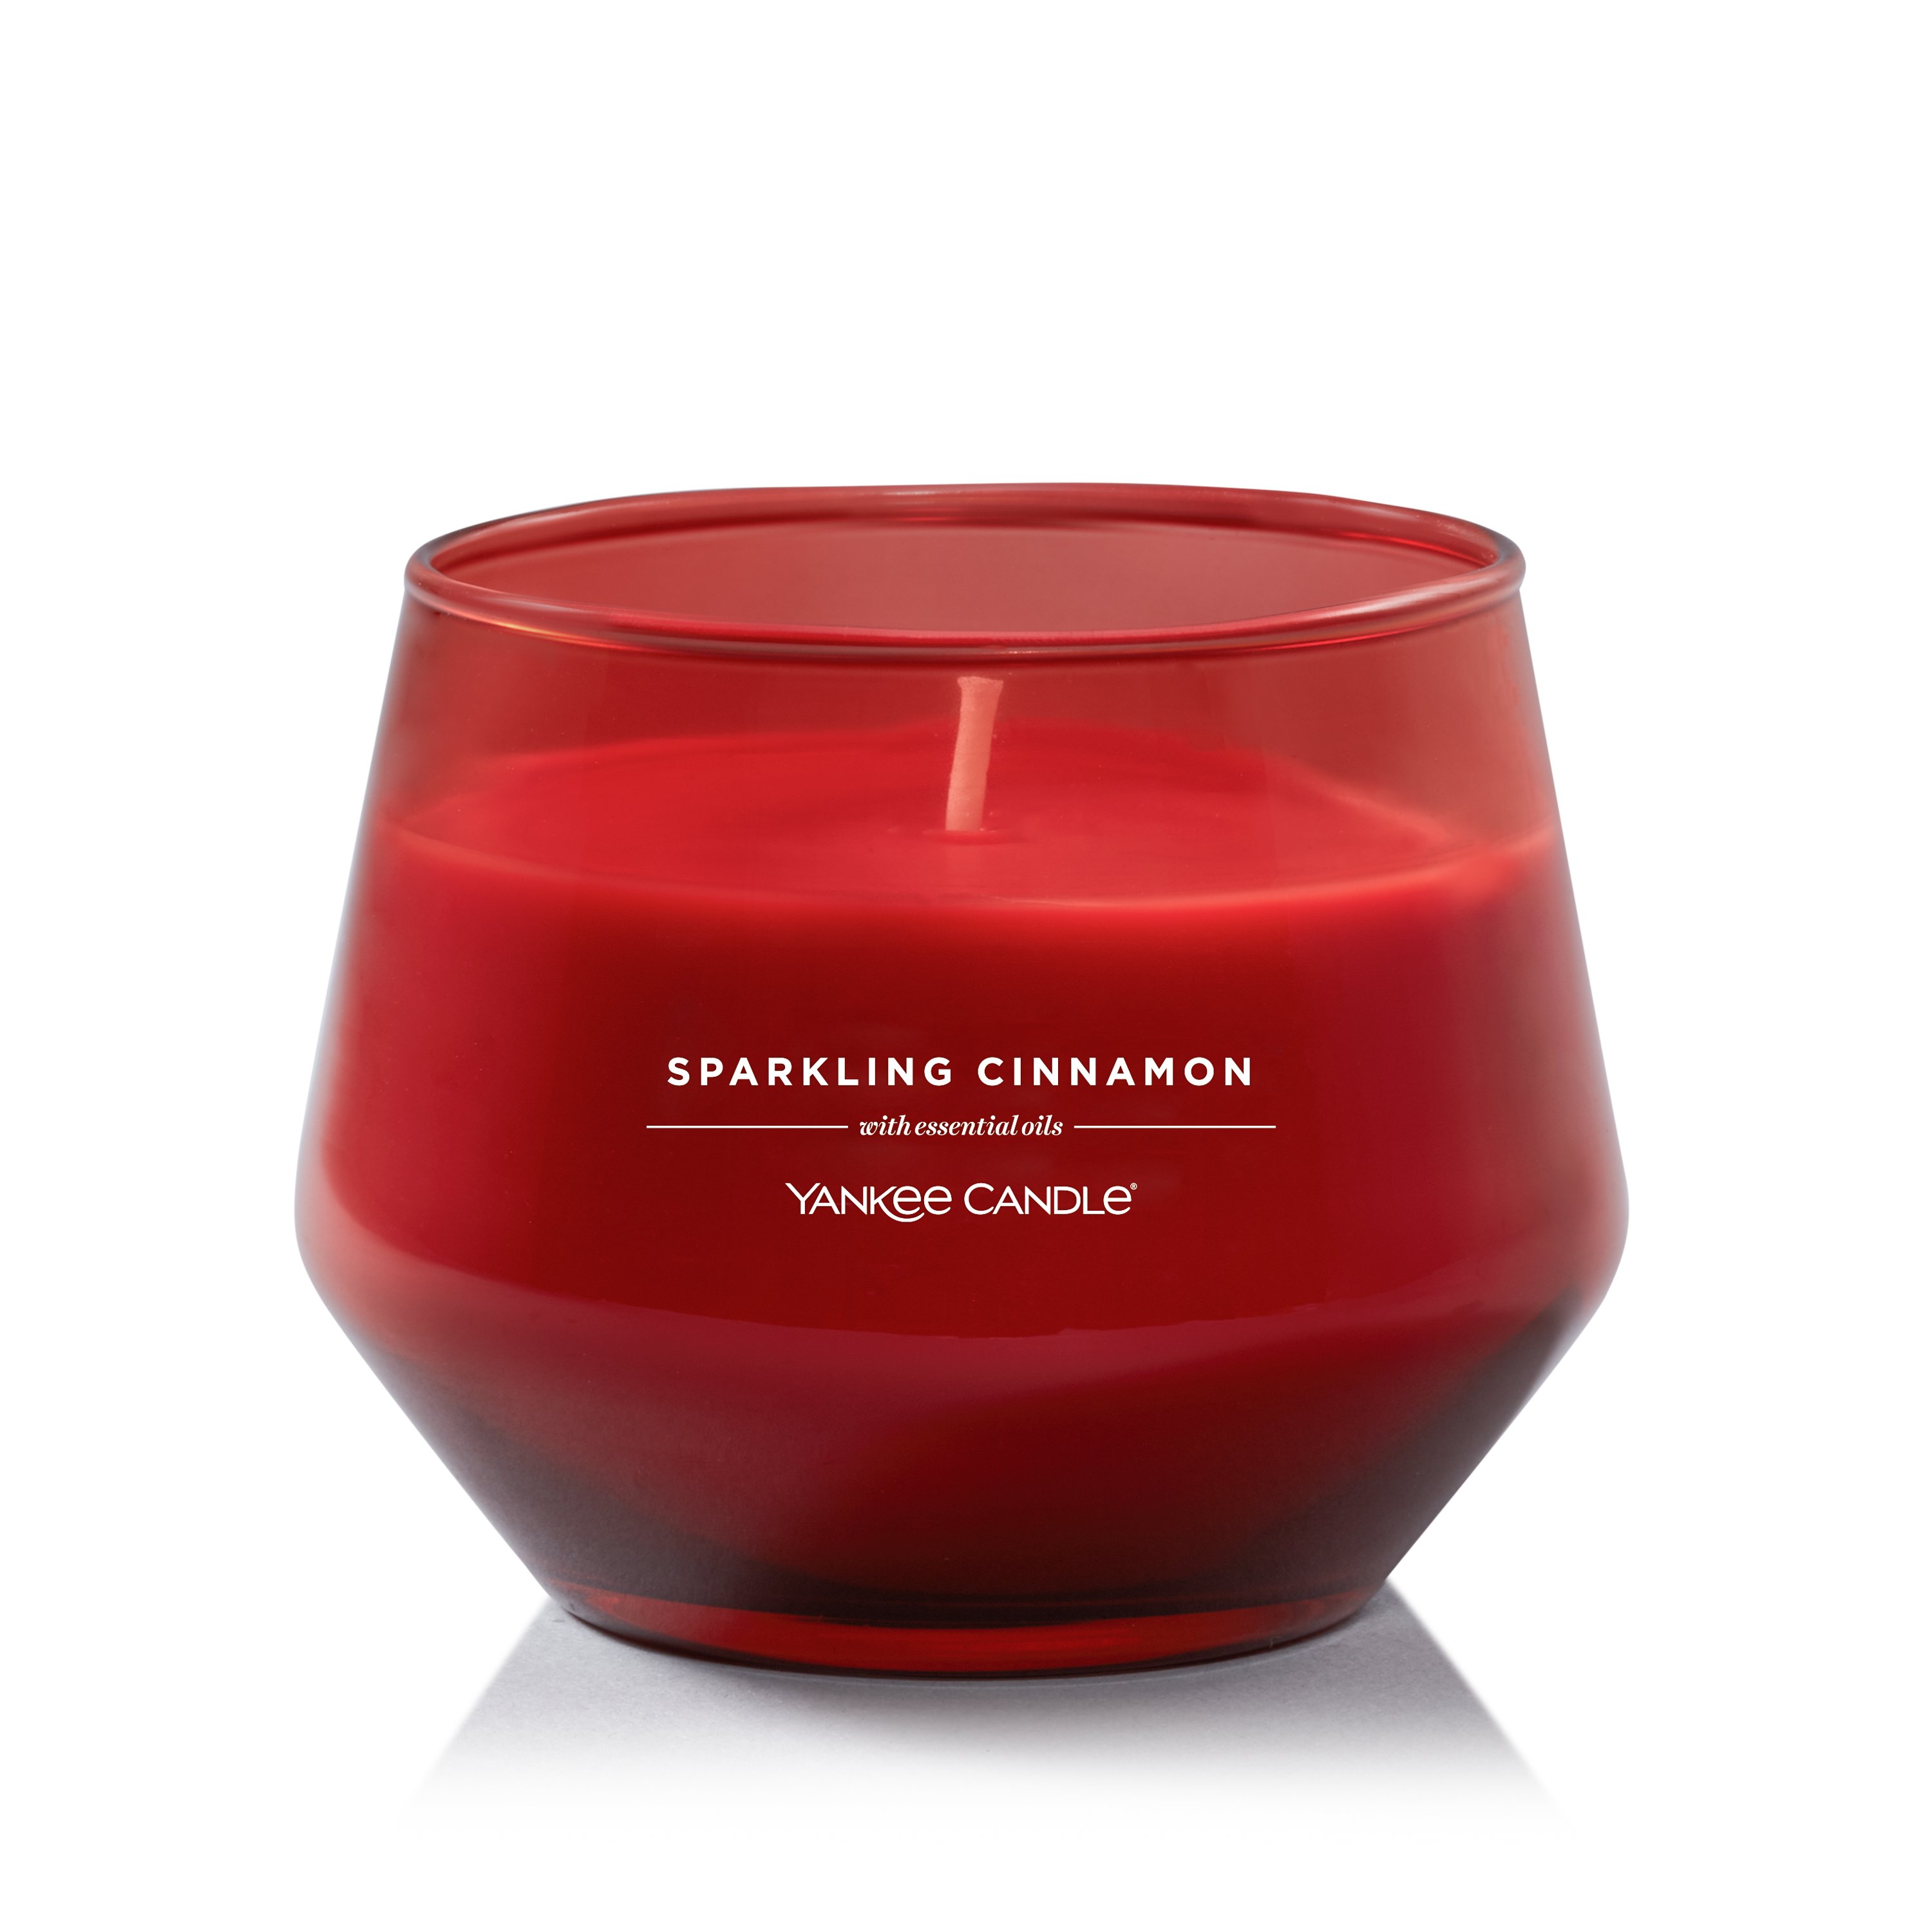 Yankee Candle Sparkling Cinnamon Studio Collection Candle